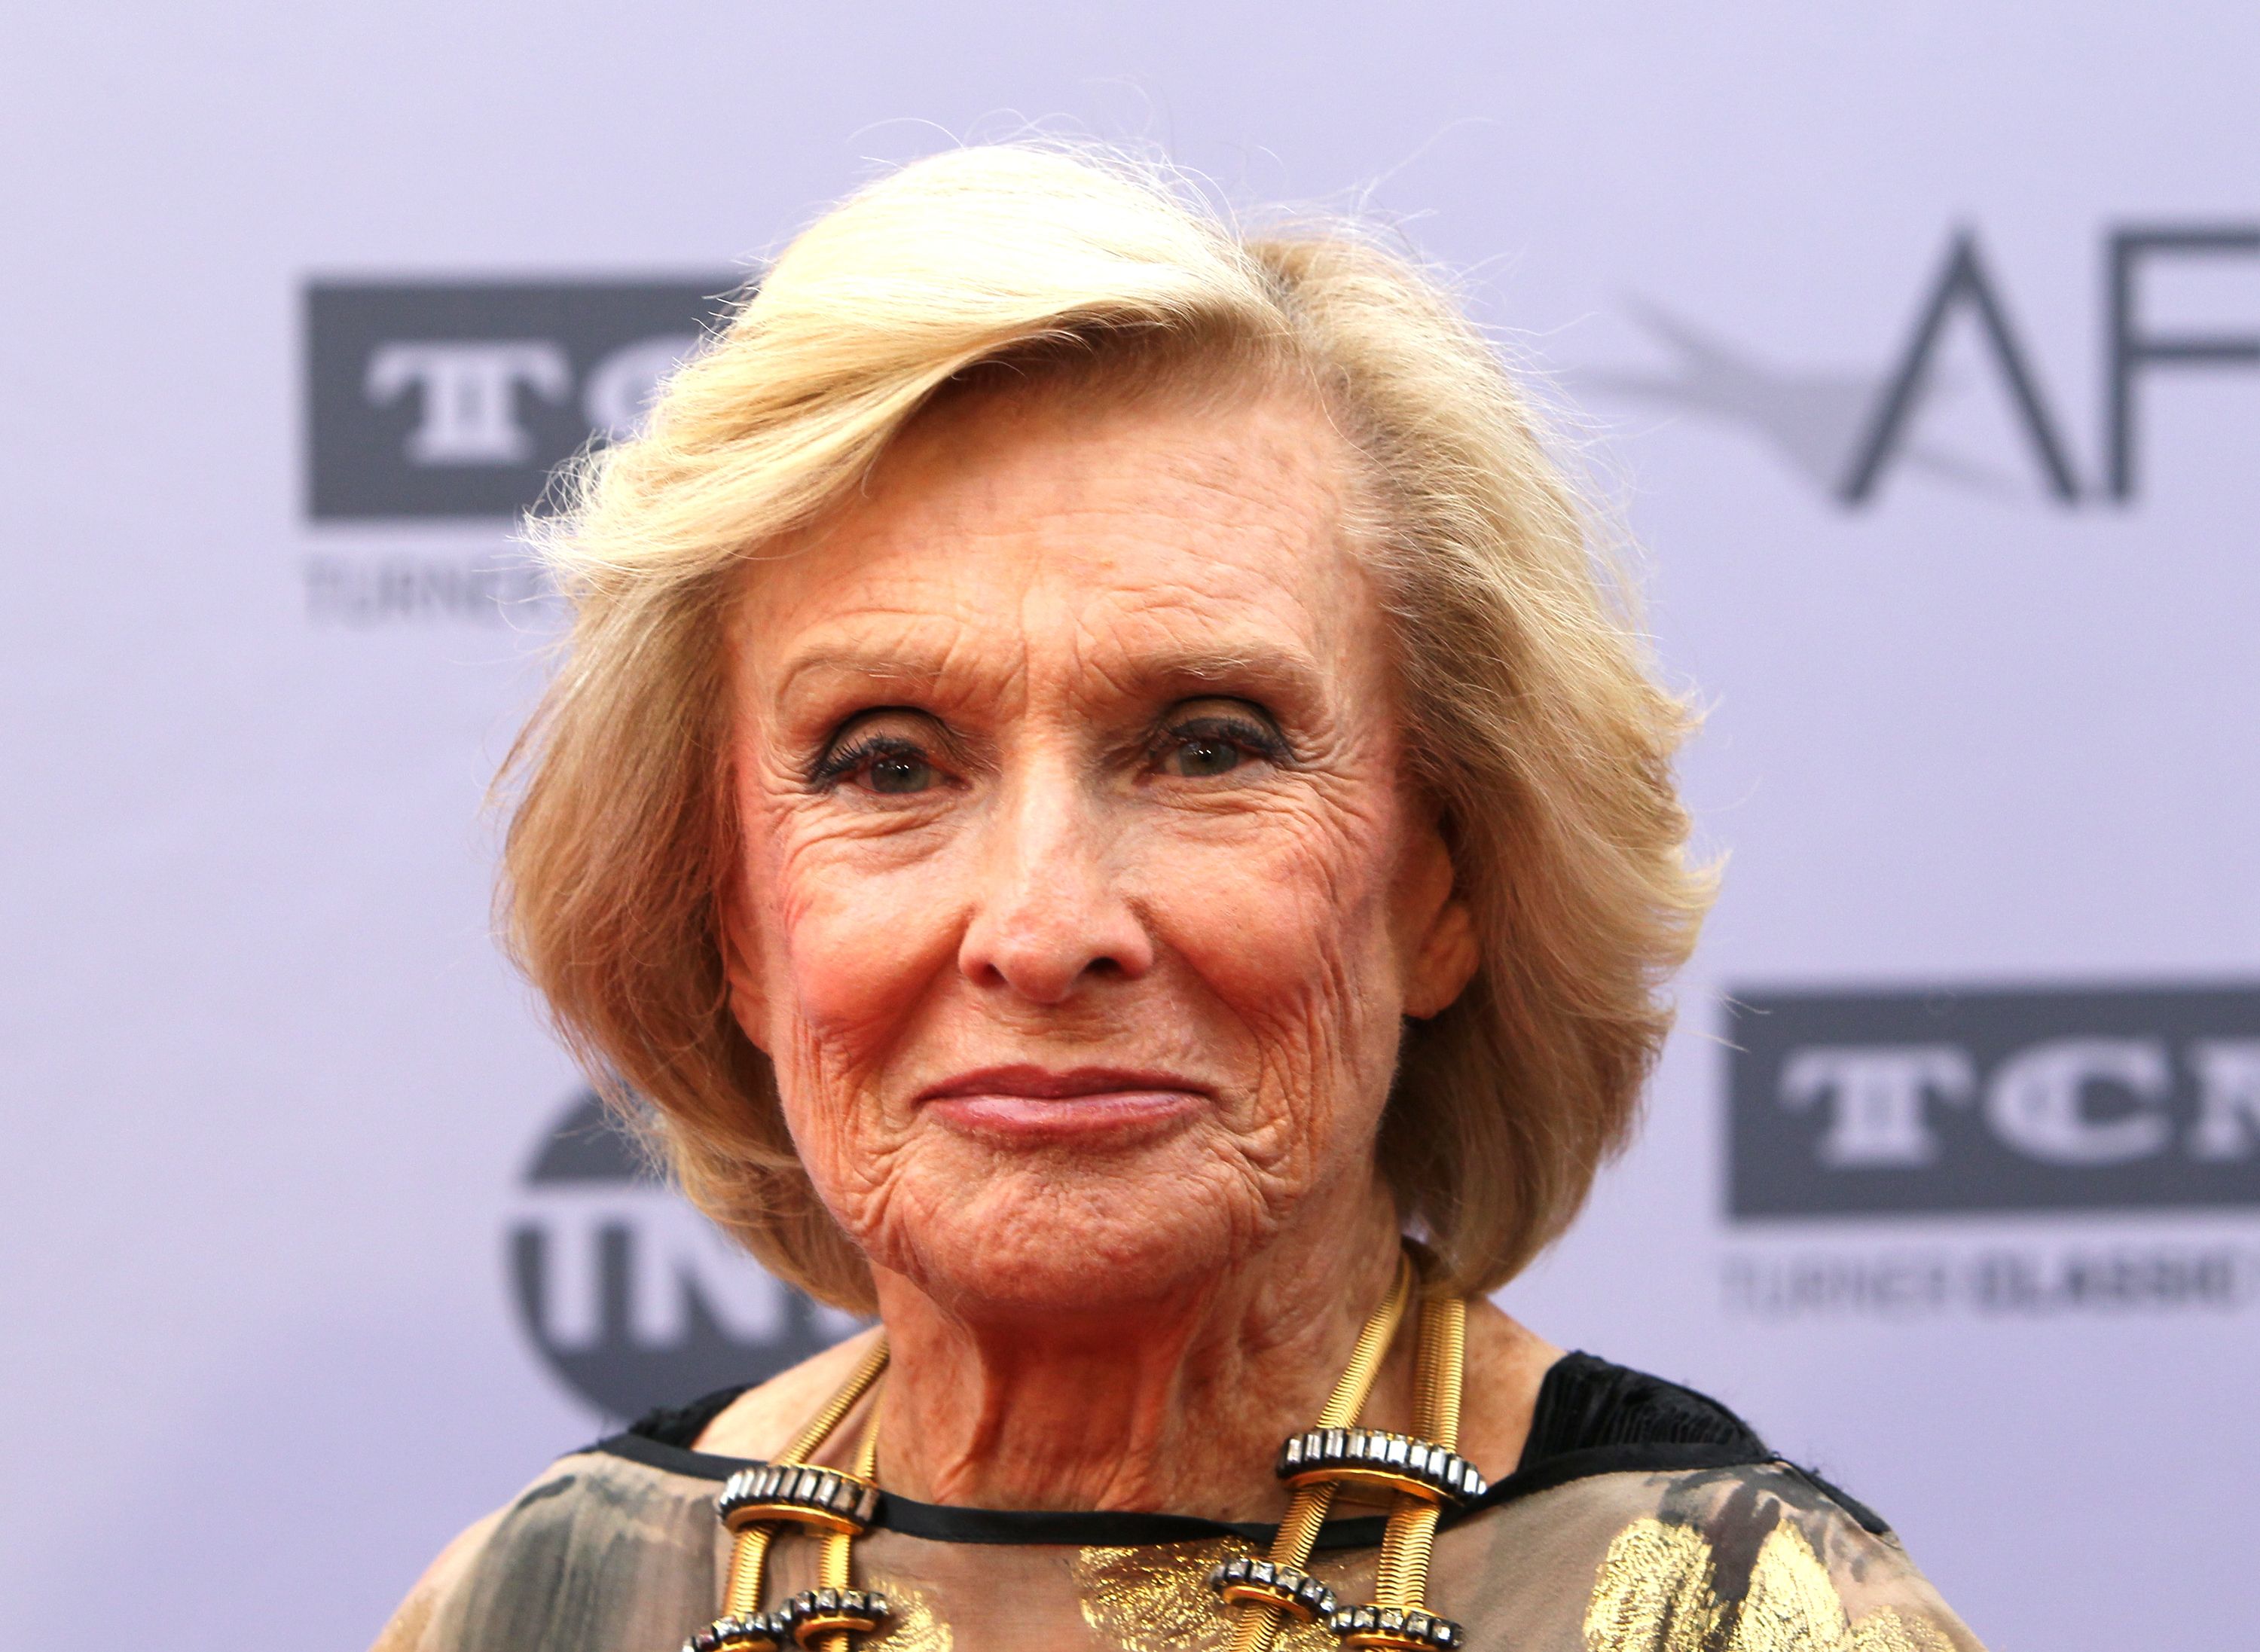 Cloris Leachman at the American Film Institute's 44th Life Achievement Award Gala Tribute to John Williams on June 9, 2016, in Hollywood, California | Photo: David Livingston/Getty Images